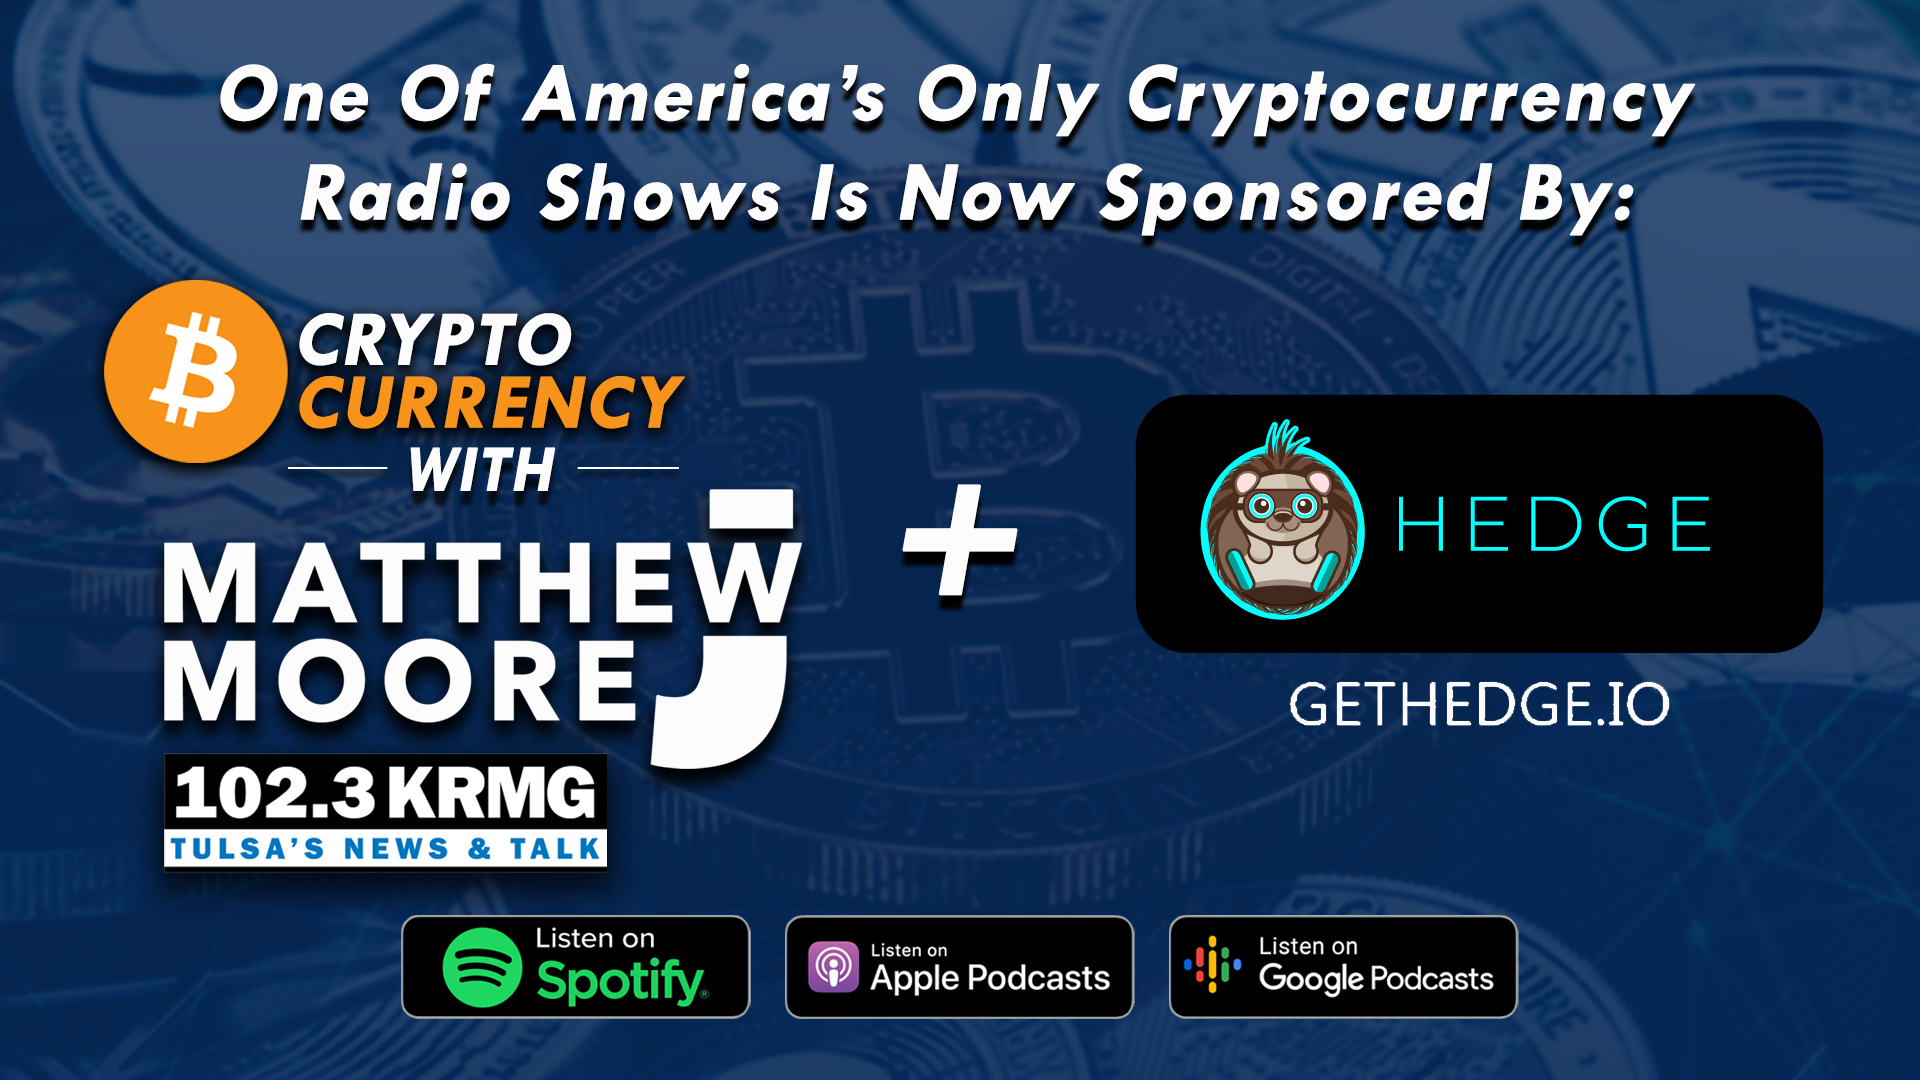 Hedge Teams Up With ‘Cryptocurrency With Matthew J. Moore’ Radio Show To Educate The Masses